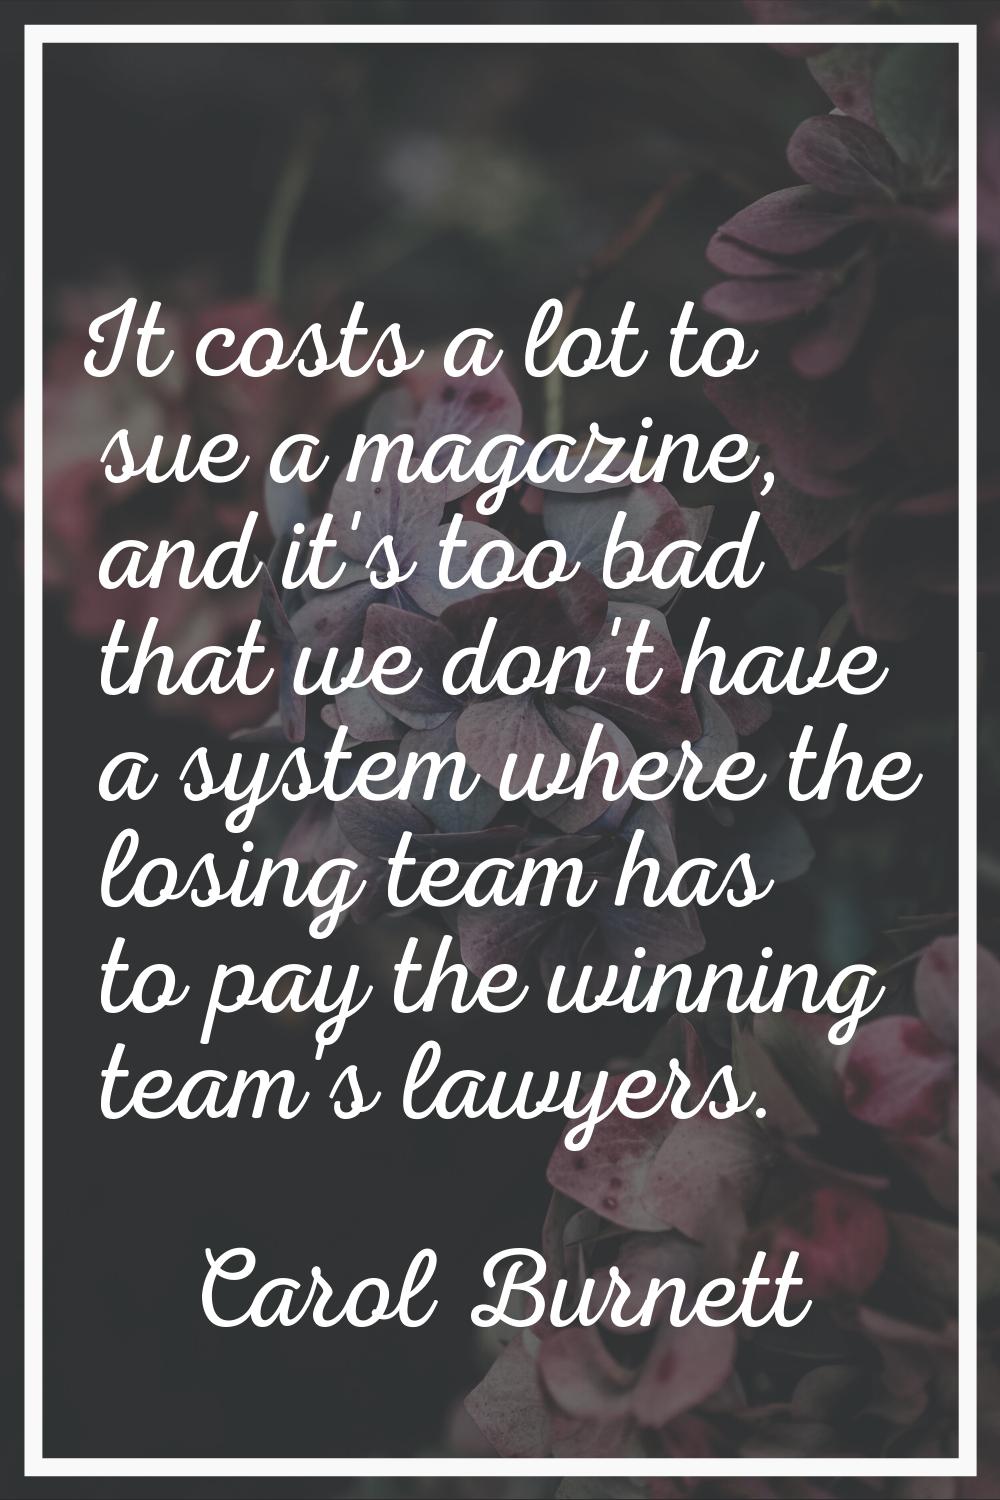 It costs a lot to sue a magazine, and it's too bad that we don't have a system where the losing tea